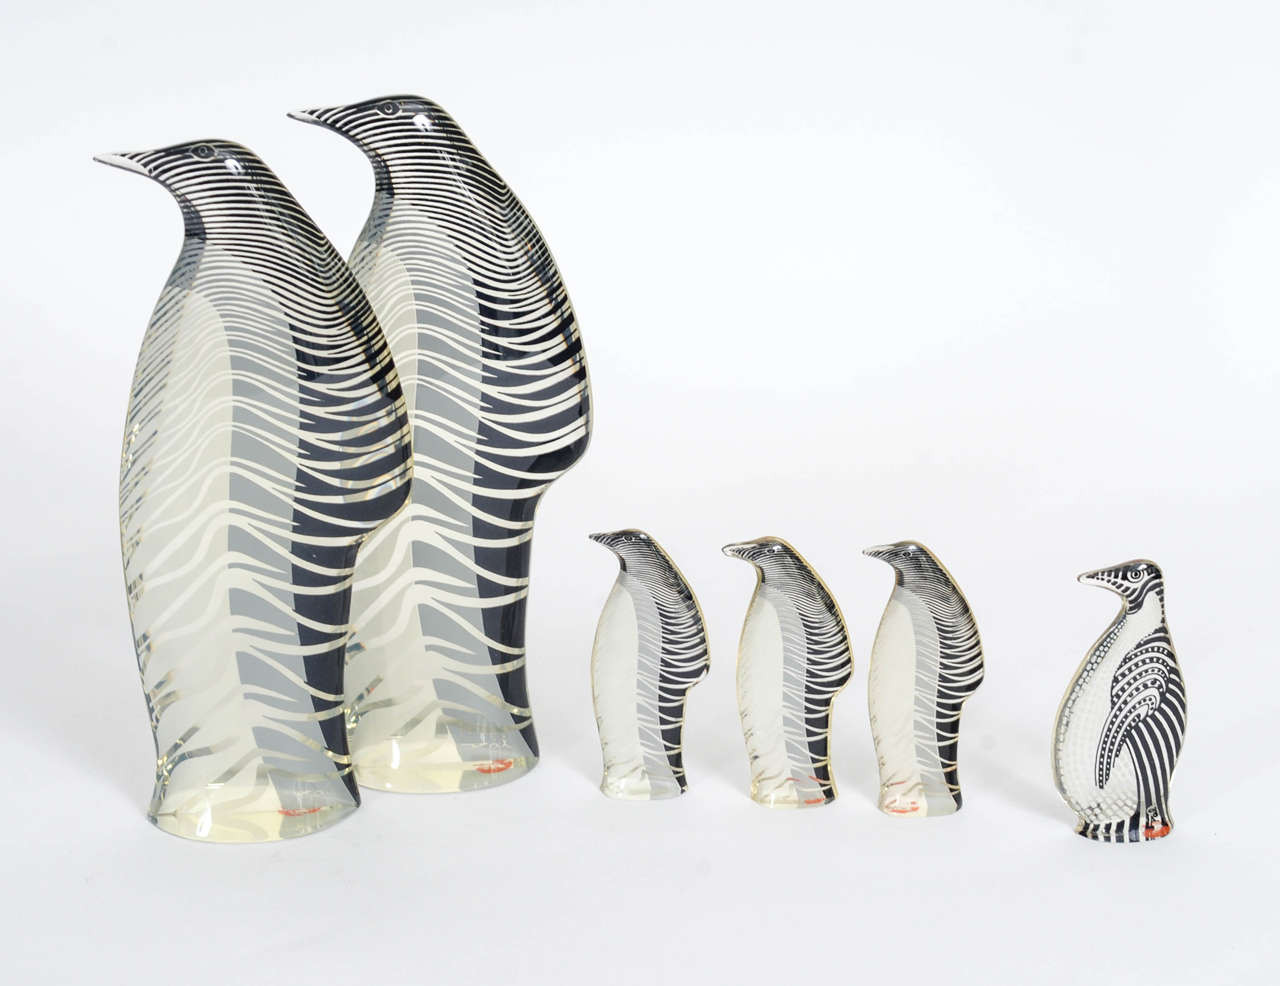 Marvellous set of a penguin family consisting of two parents and four chickens. 

The dimensions mentioned underneath are valid for the parents.
The dimensions for the chickens are 10 cm high and 4 cm wide.

The Brazilian artist Abraham